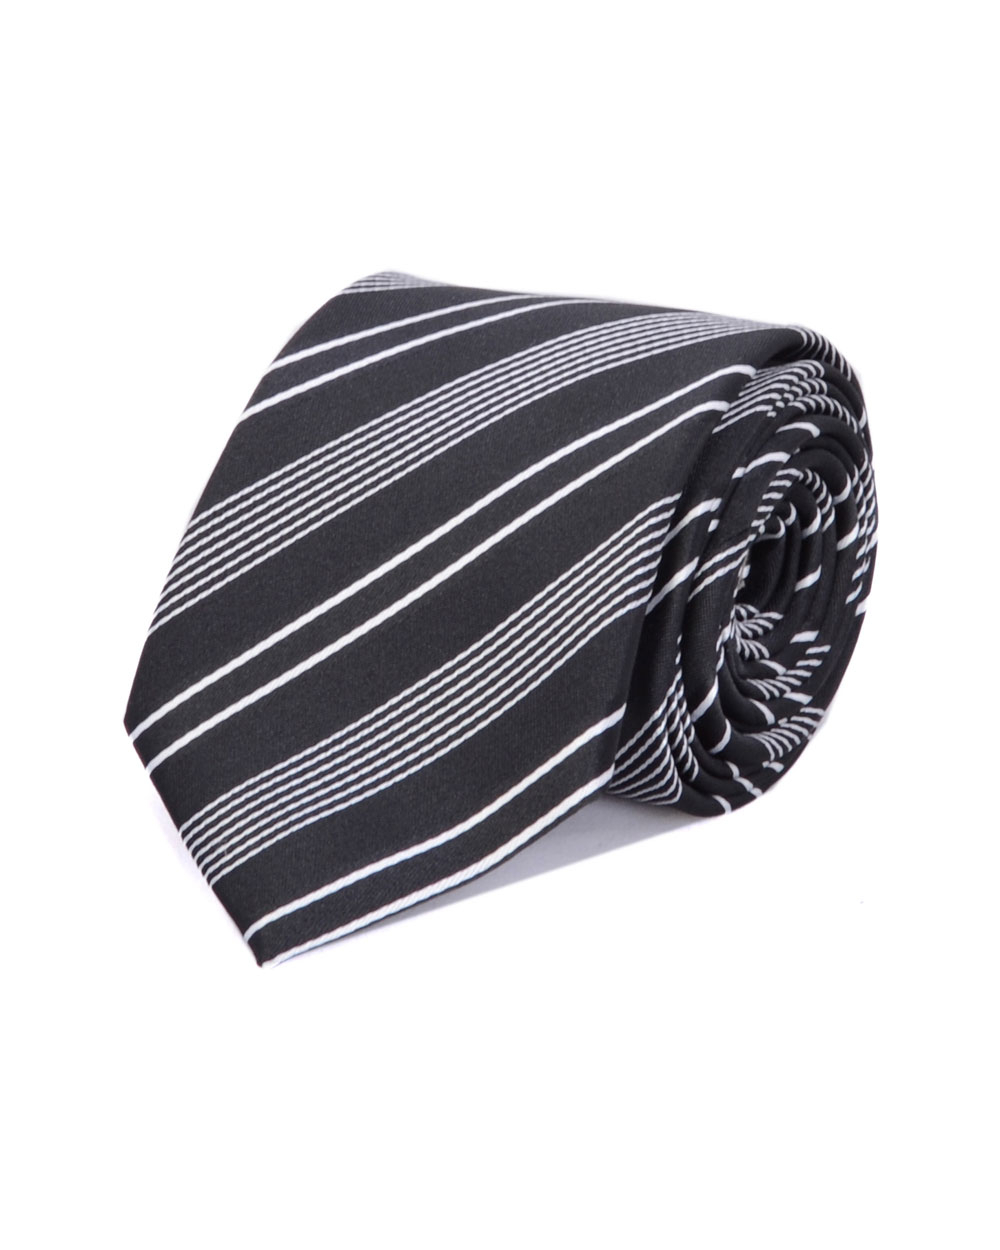 Double Two Extra Long Patterned Tie (black/white)